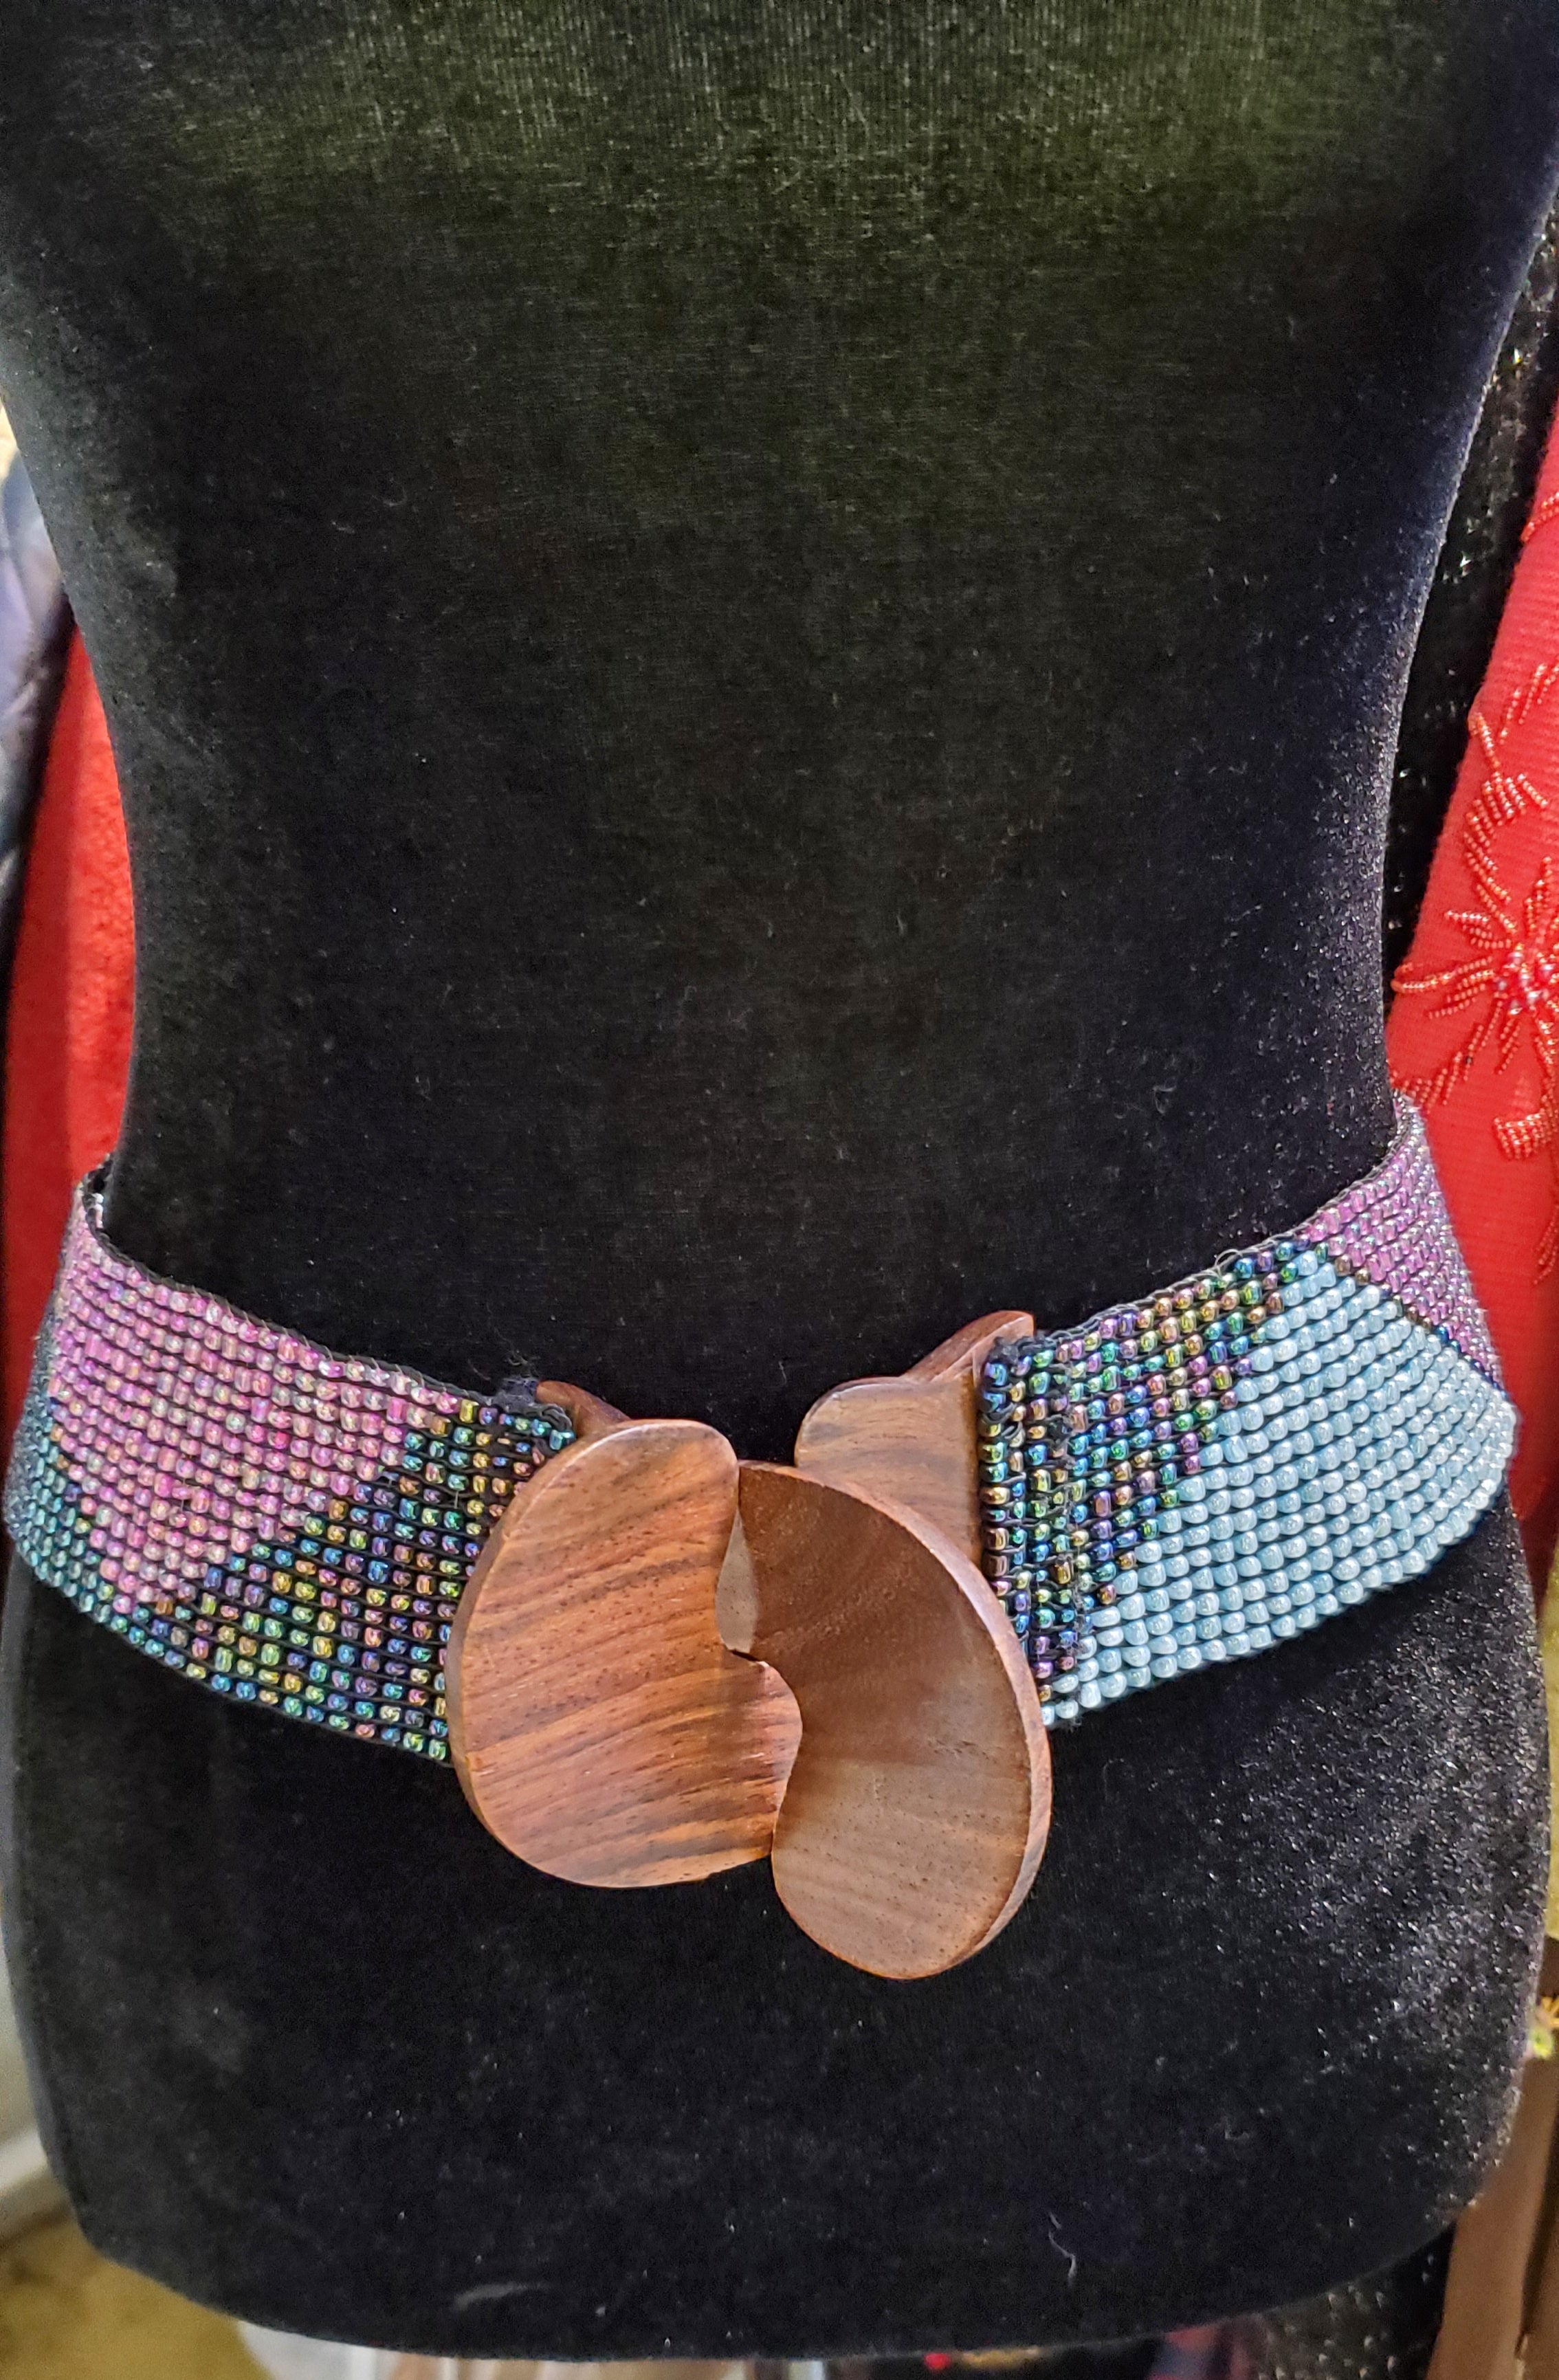 70's/80's Multi Color Beaded Stretchy Waist Belt with Wood Buckles (Fits up to Size XL)